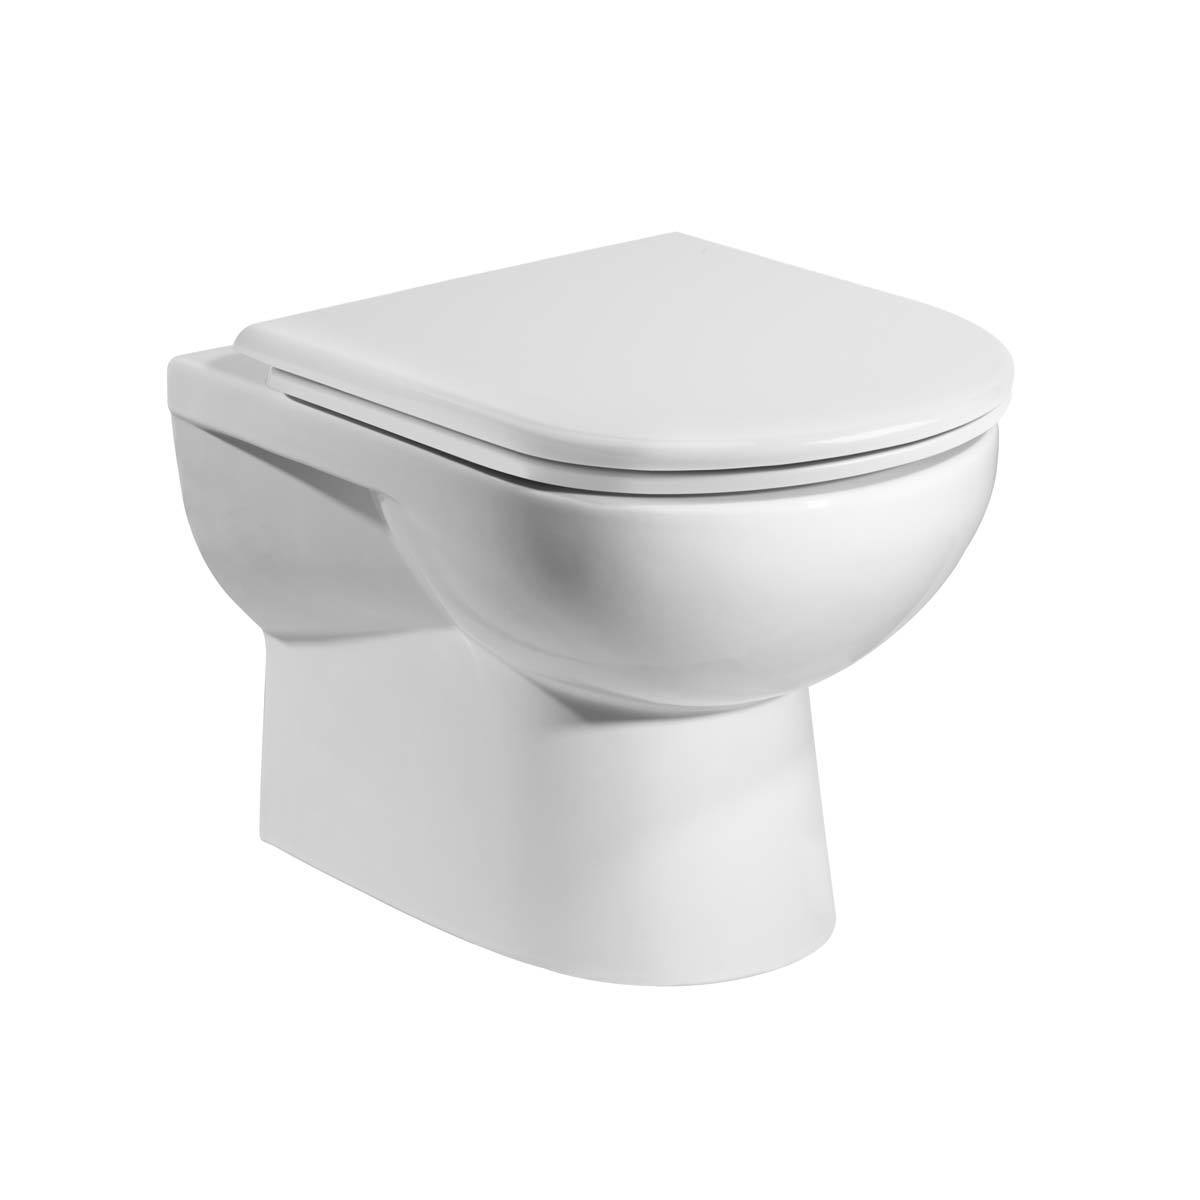 Tavistock Micra Wall Hung Toilet with Soft Close Seat - Model WCWH100S